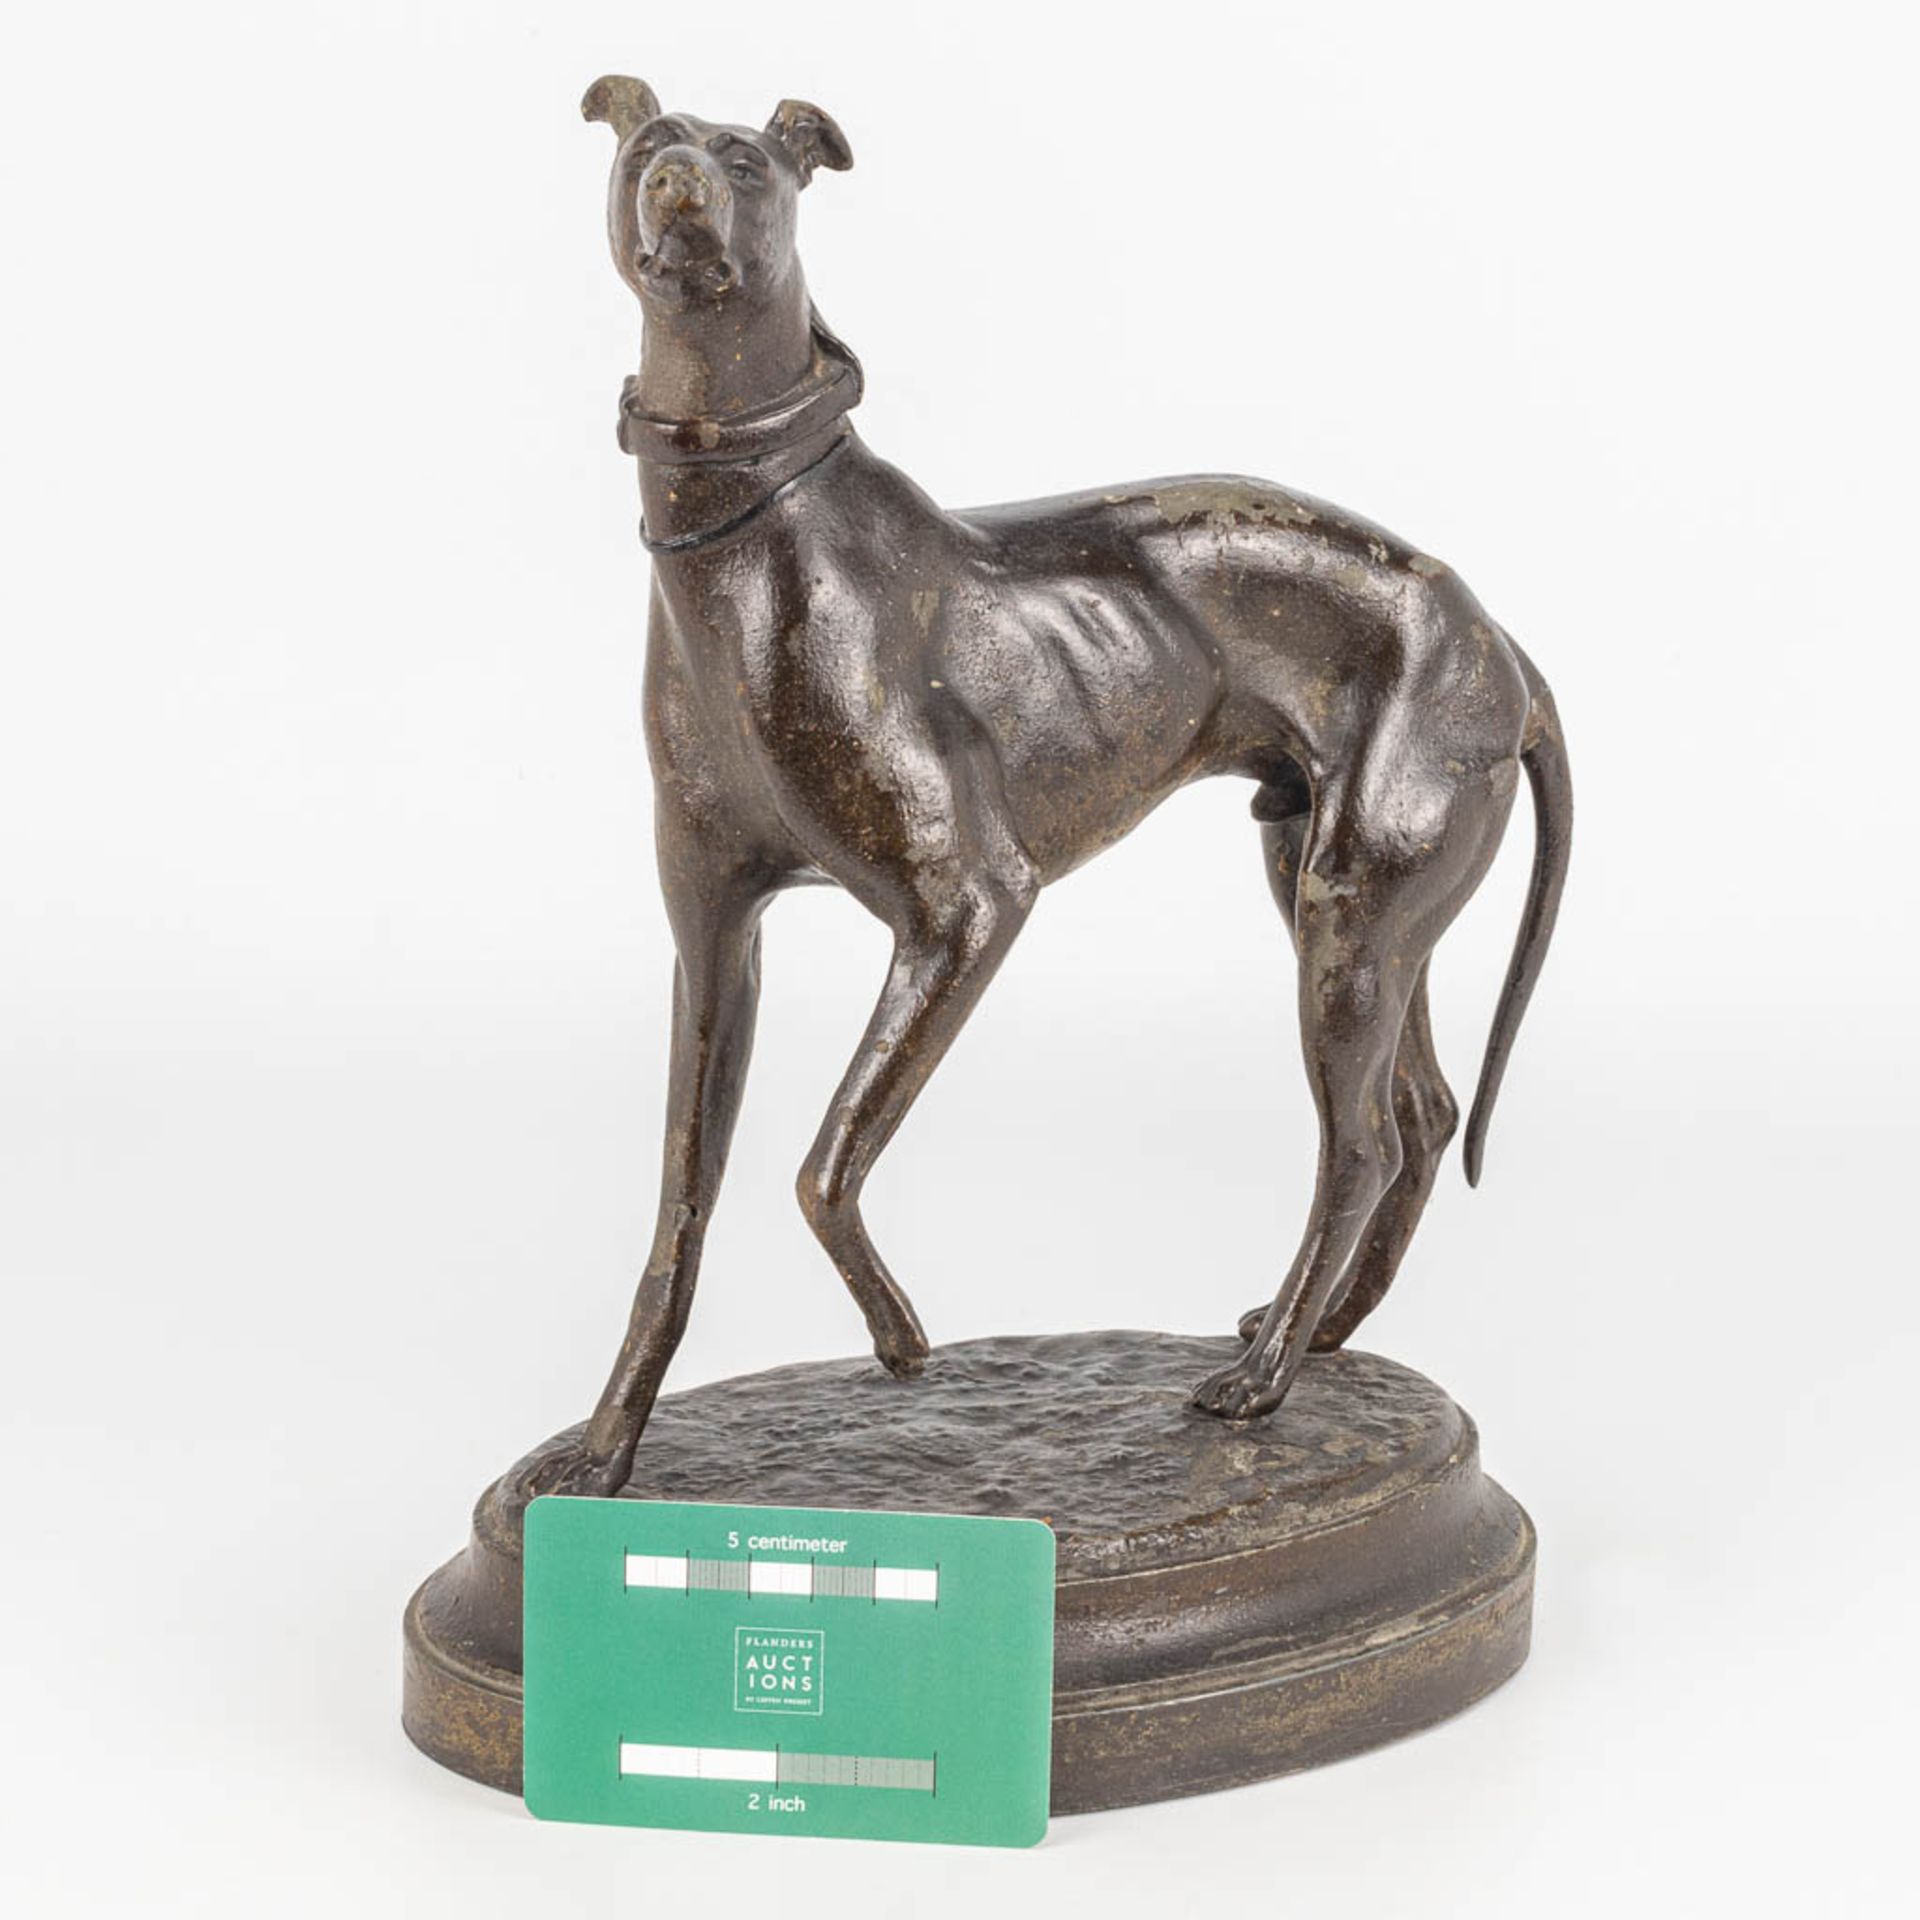 A statue of a greyhound made of spelter, Illegibly signed. - Image 4 of 12